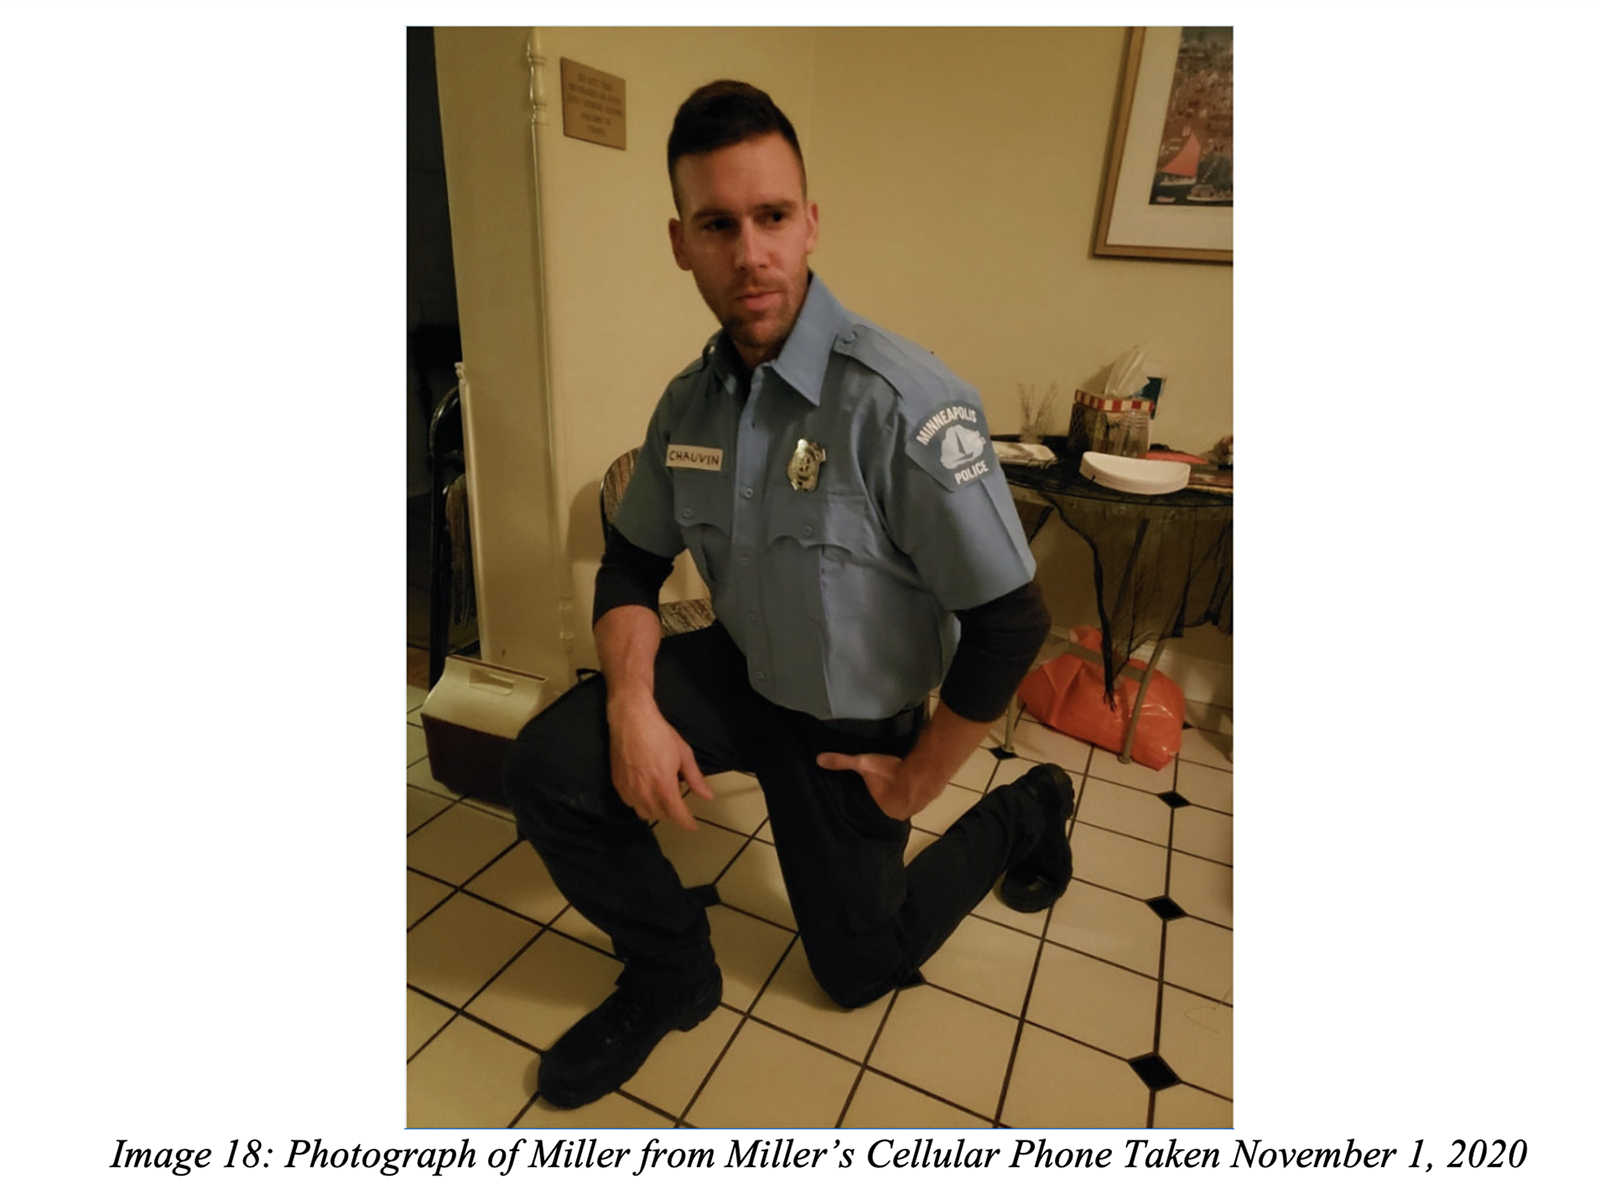 Scott Miller in a 2020 Halloween costume with badges reading “Minneapolis Police” and “CHAUVIN,” references to the police officer who has been convicted of the murder of GeorgeFloyd in the summer of 2020. (Photo via U.S. government sentencing memorandum)